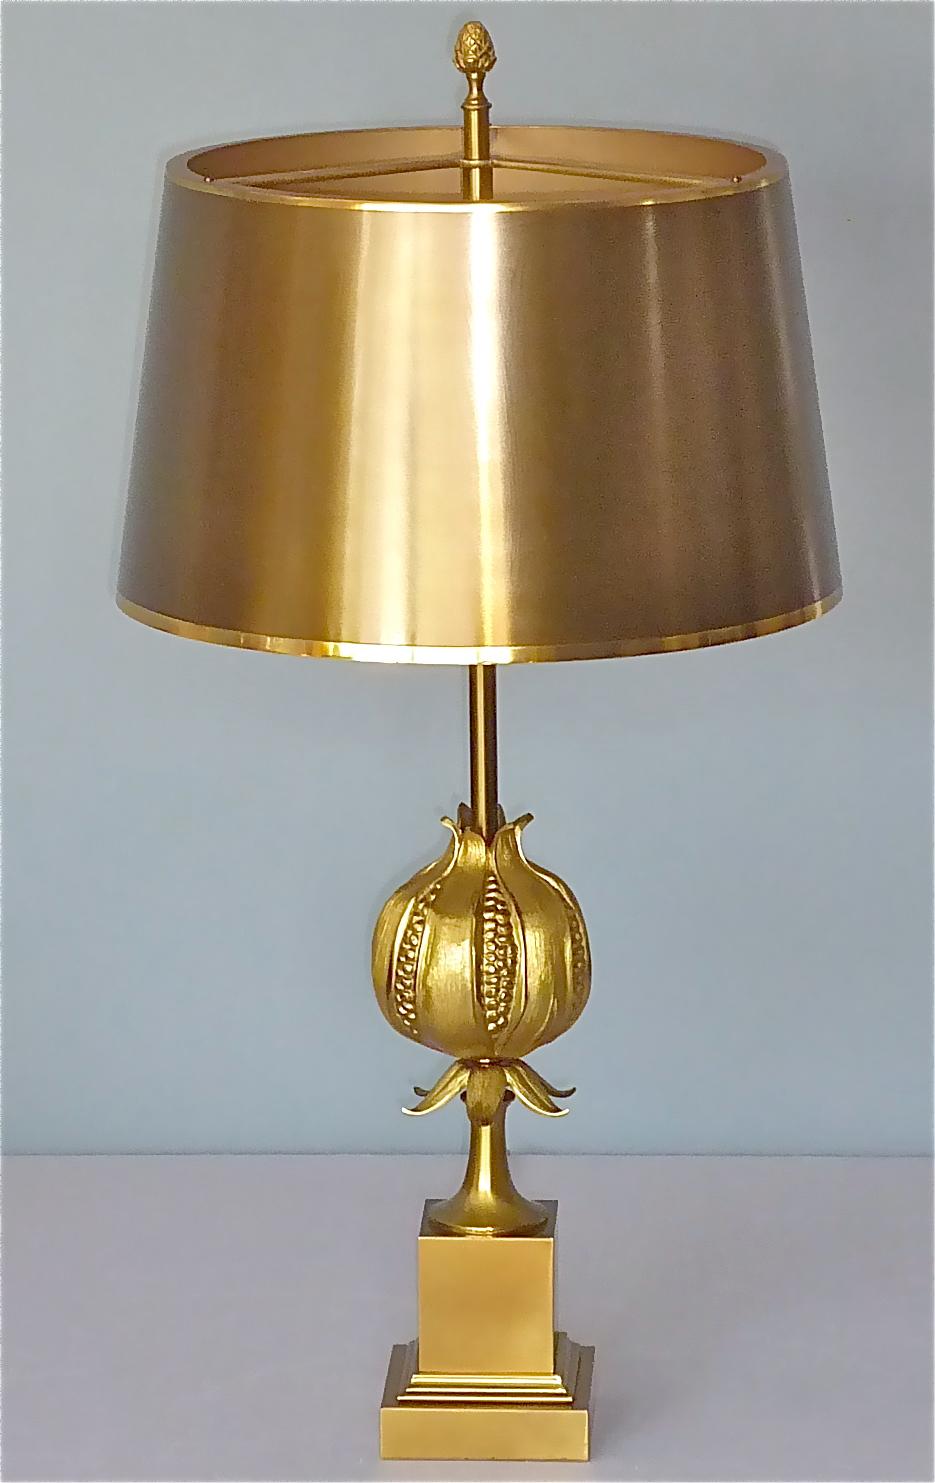 A gorgeous handcrafted heavy and highest quality table lamp by the renowned and famous french company Maison Charles, Paris, France, circa 1970s. Made of gilt and solid hand-cast and carved bronze with a seamless spun brass shade with finial